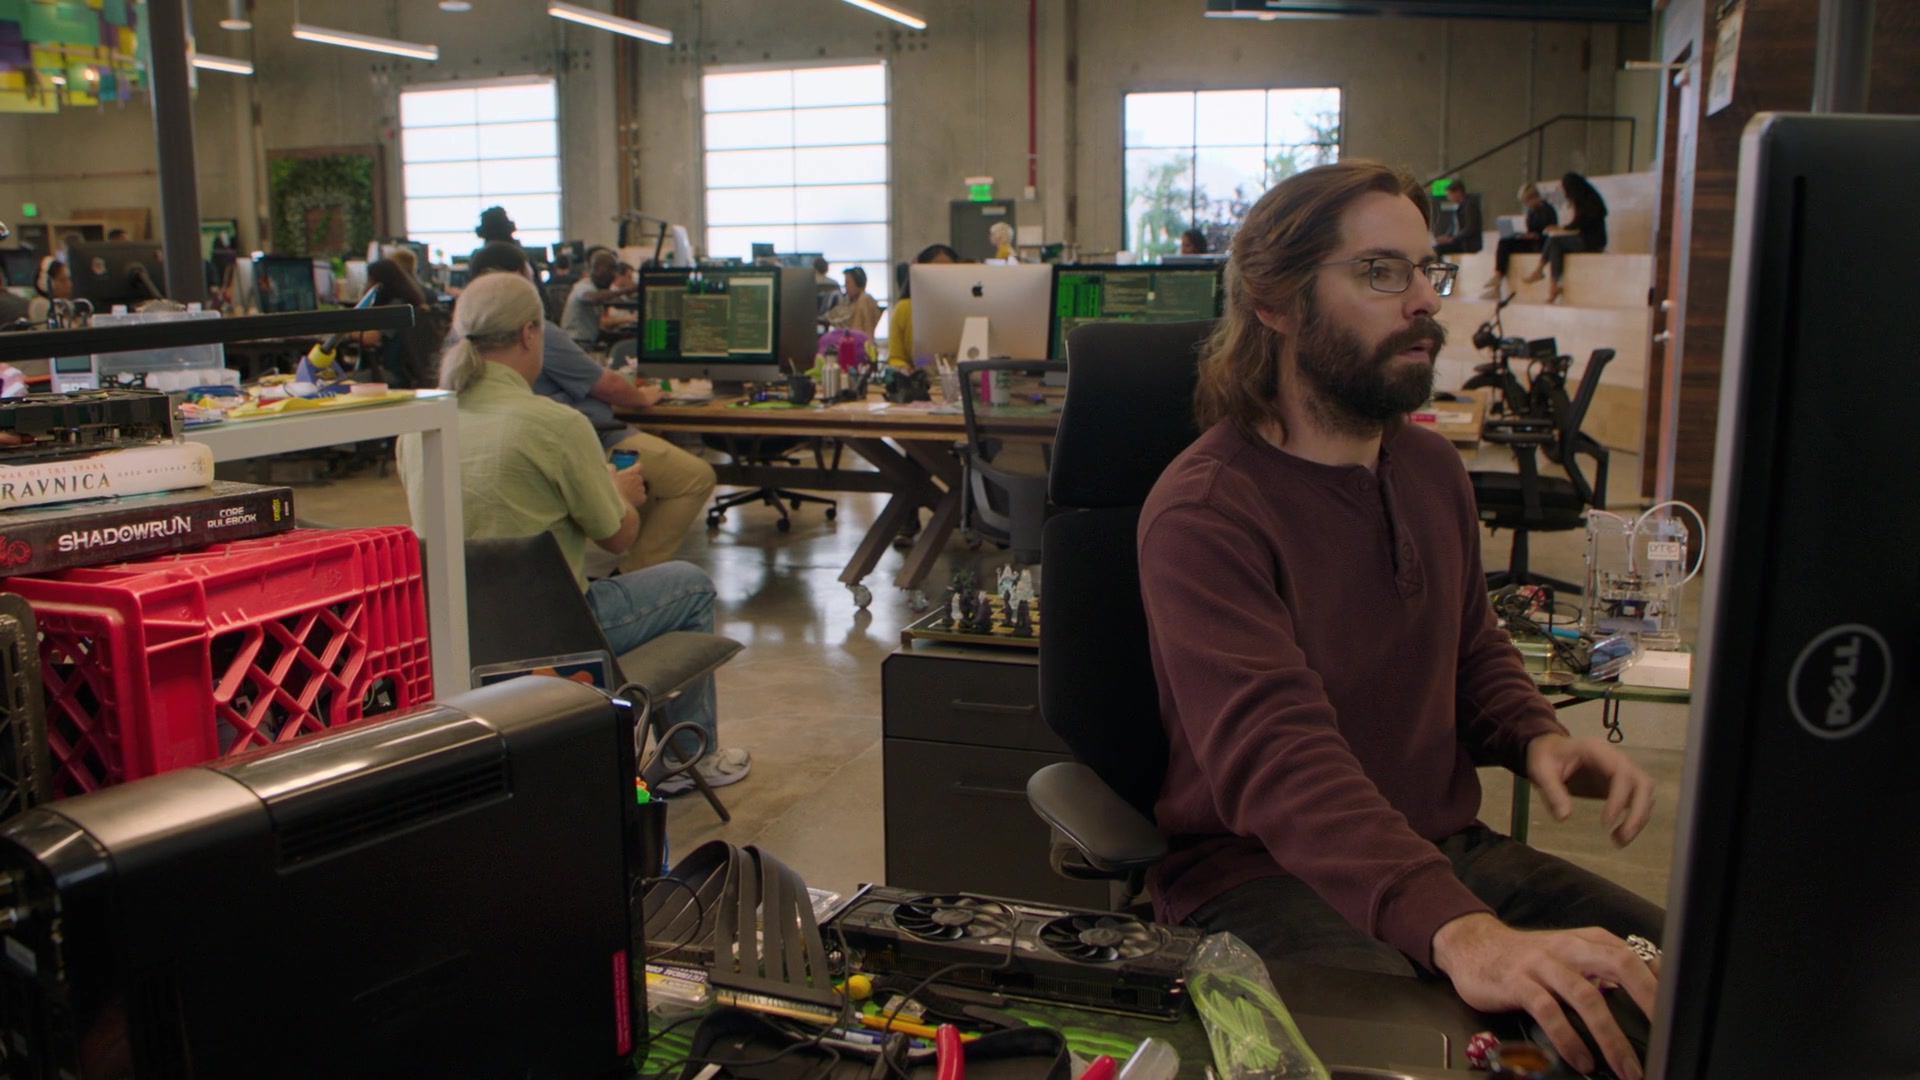 Dell-Widescreen-Monitors-Used-by-Martin-Starr-as-Bertram-Gilfoyle-in-Silicon-Valley-Season-6-Episode-4-2.jpg